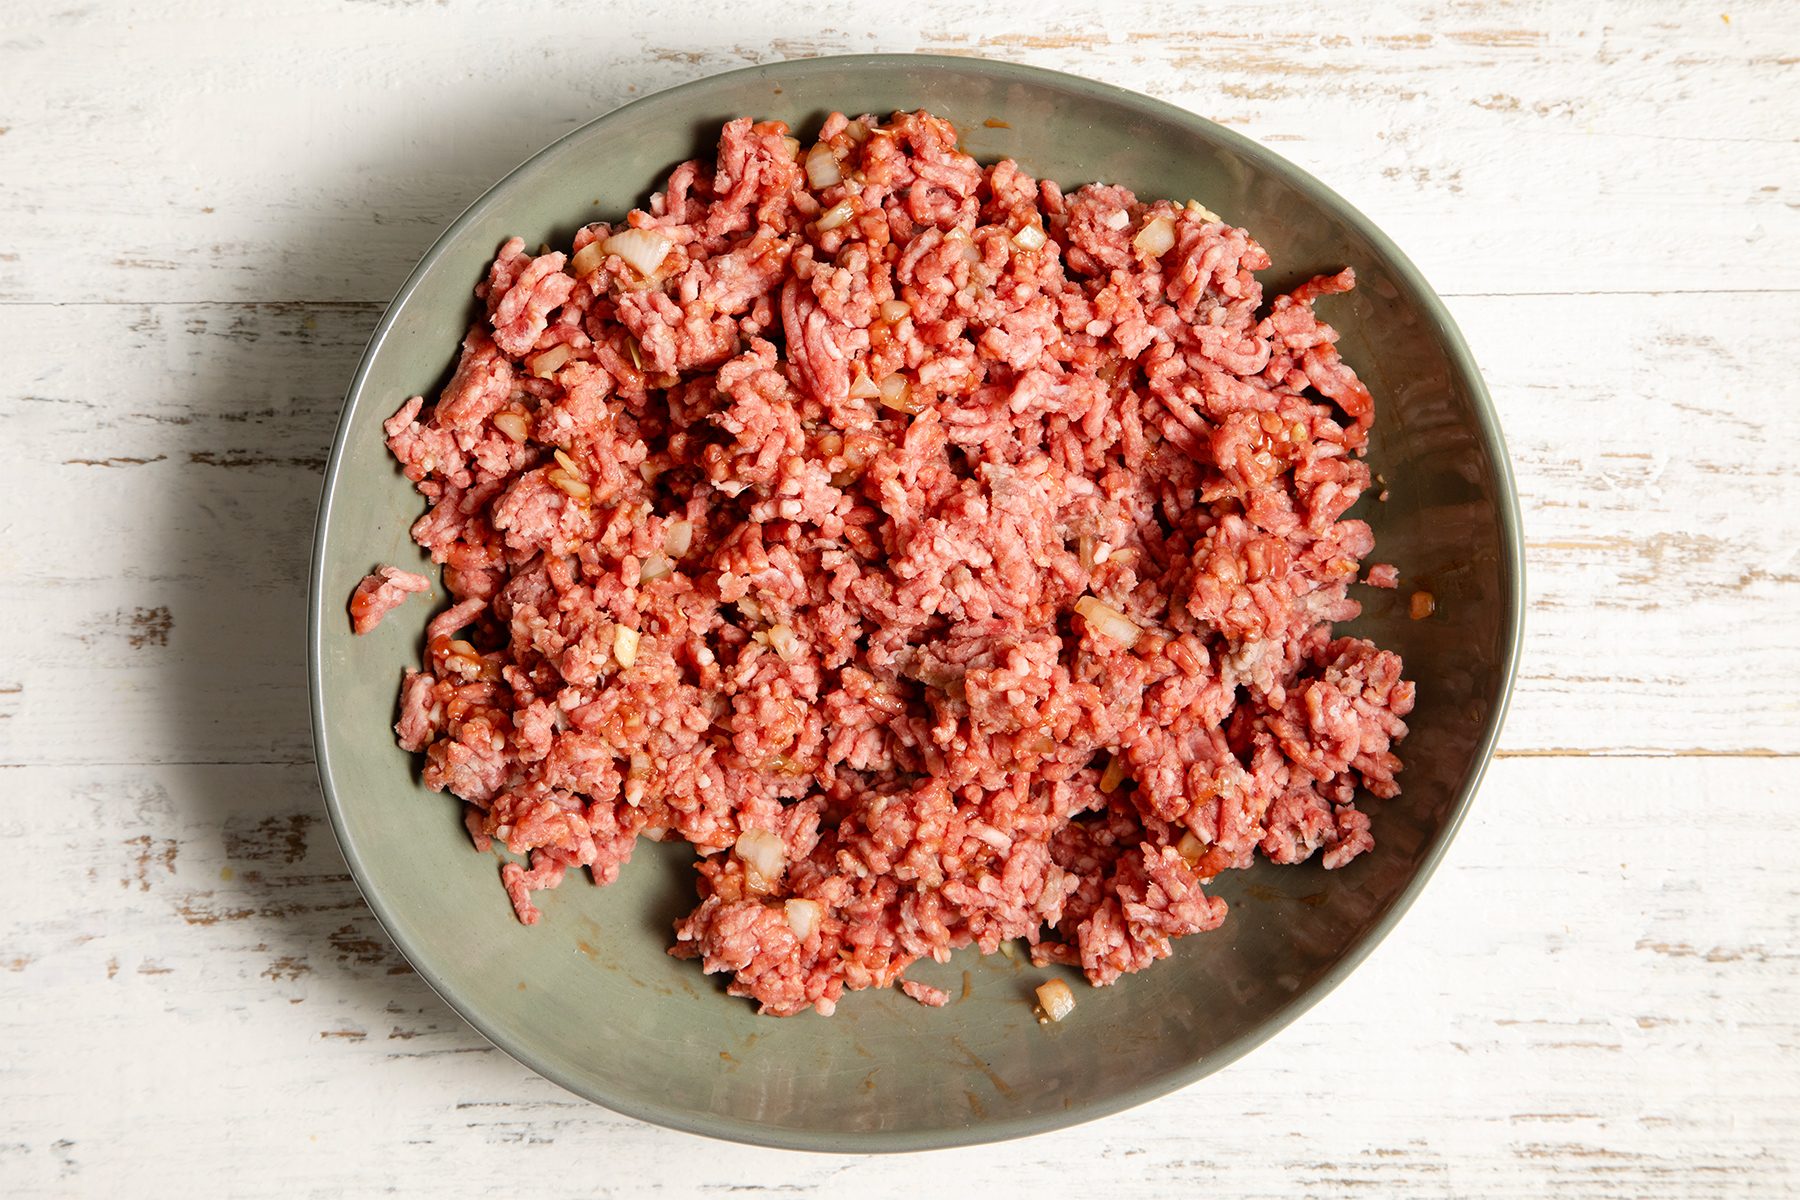 A large oval bowl filled with ground meat sits on a rustic white wooden surface. 